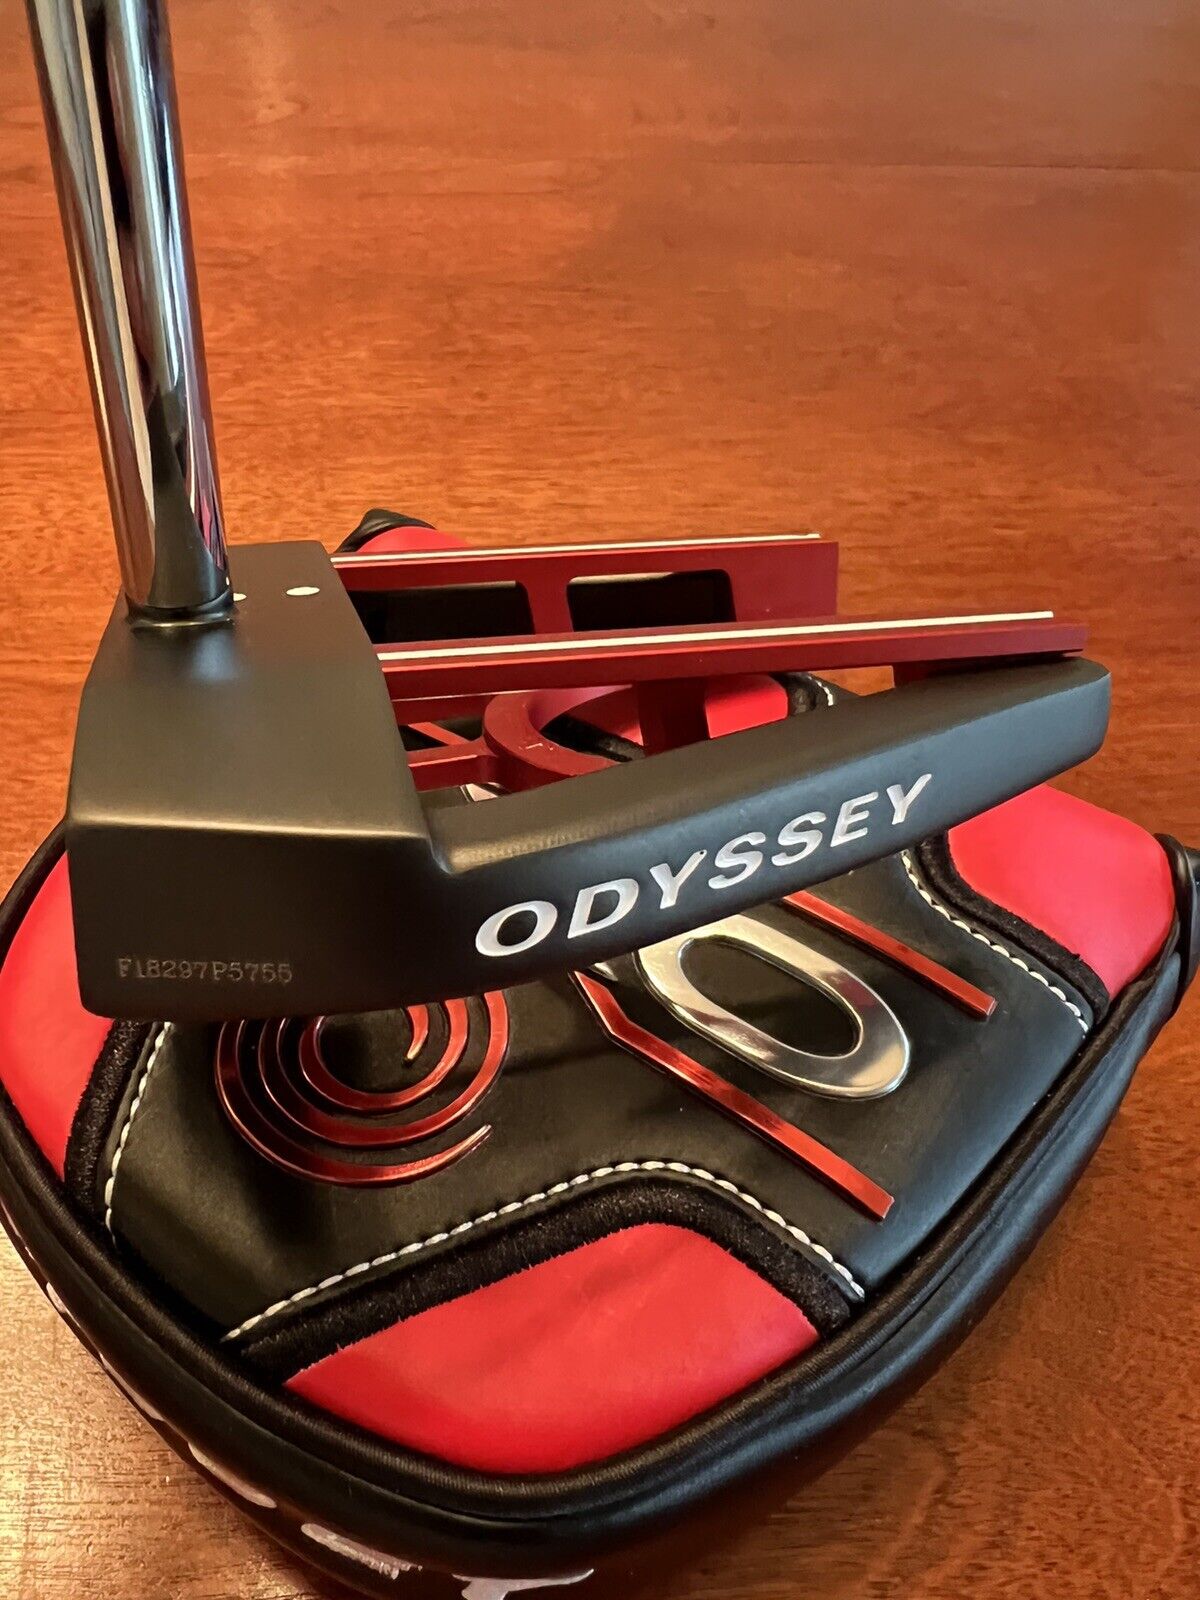 Beauty Odyssey EXO SEVEN Center Shaft 34 in. With Headcover Excellent Condition!